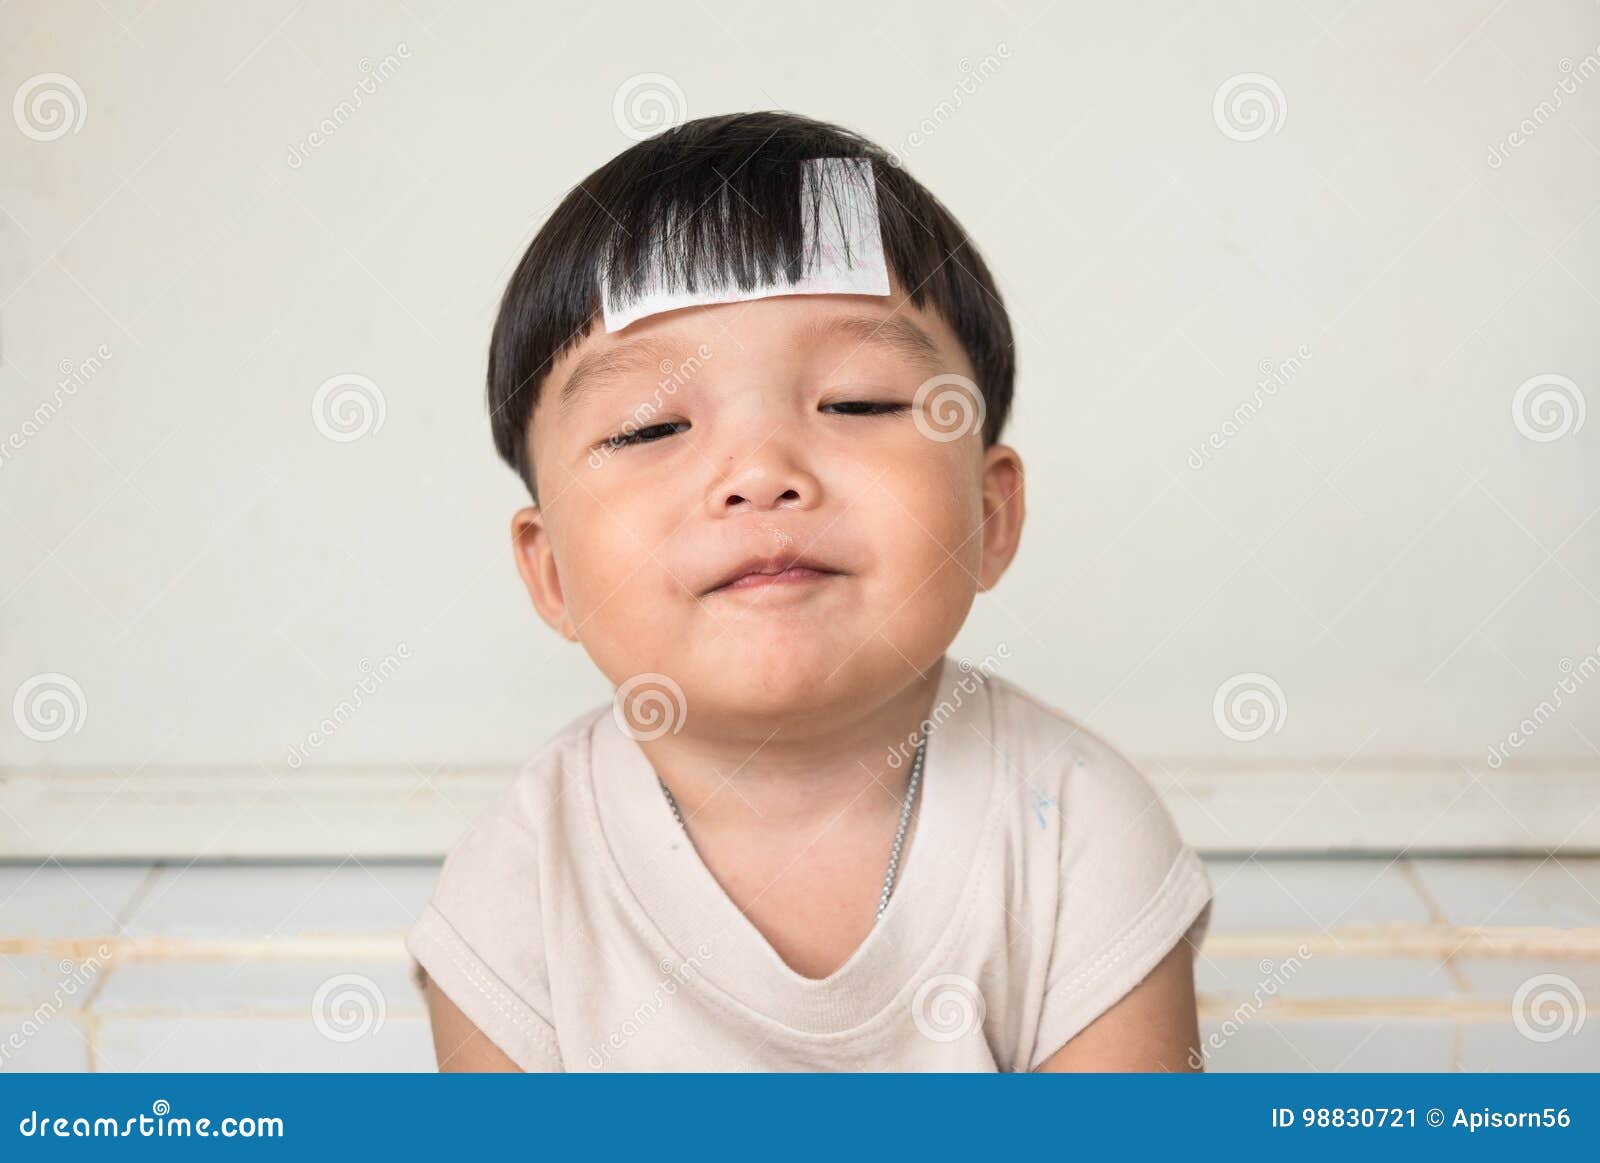 adorable plump boy smilingly with chubby cheeked and close eyes. front view of kid with illness